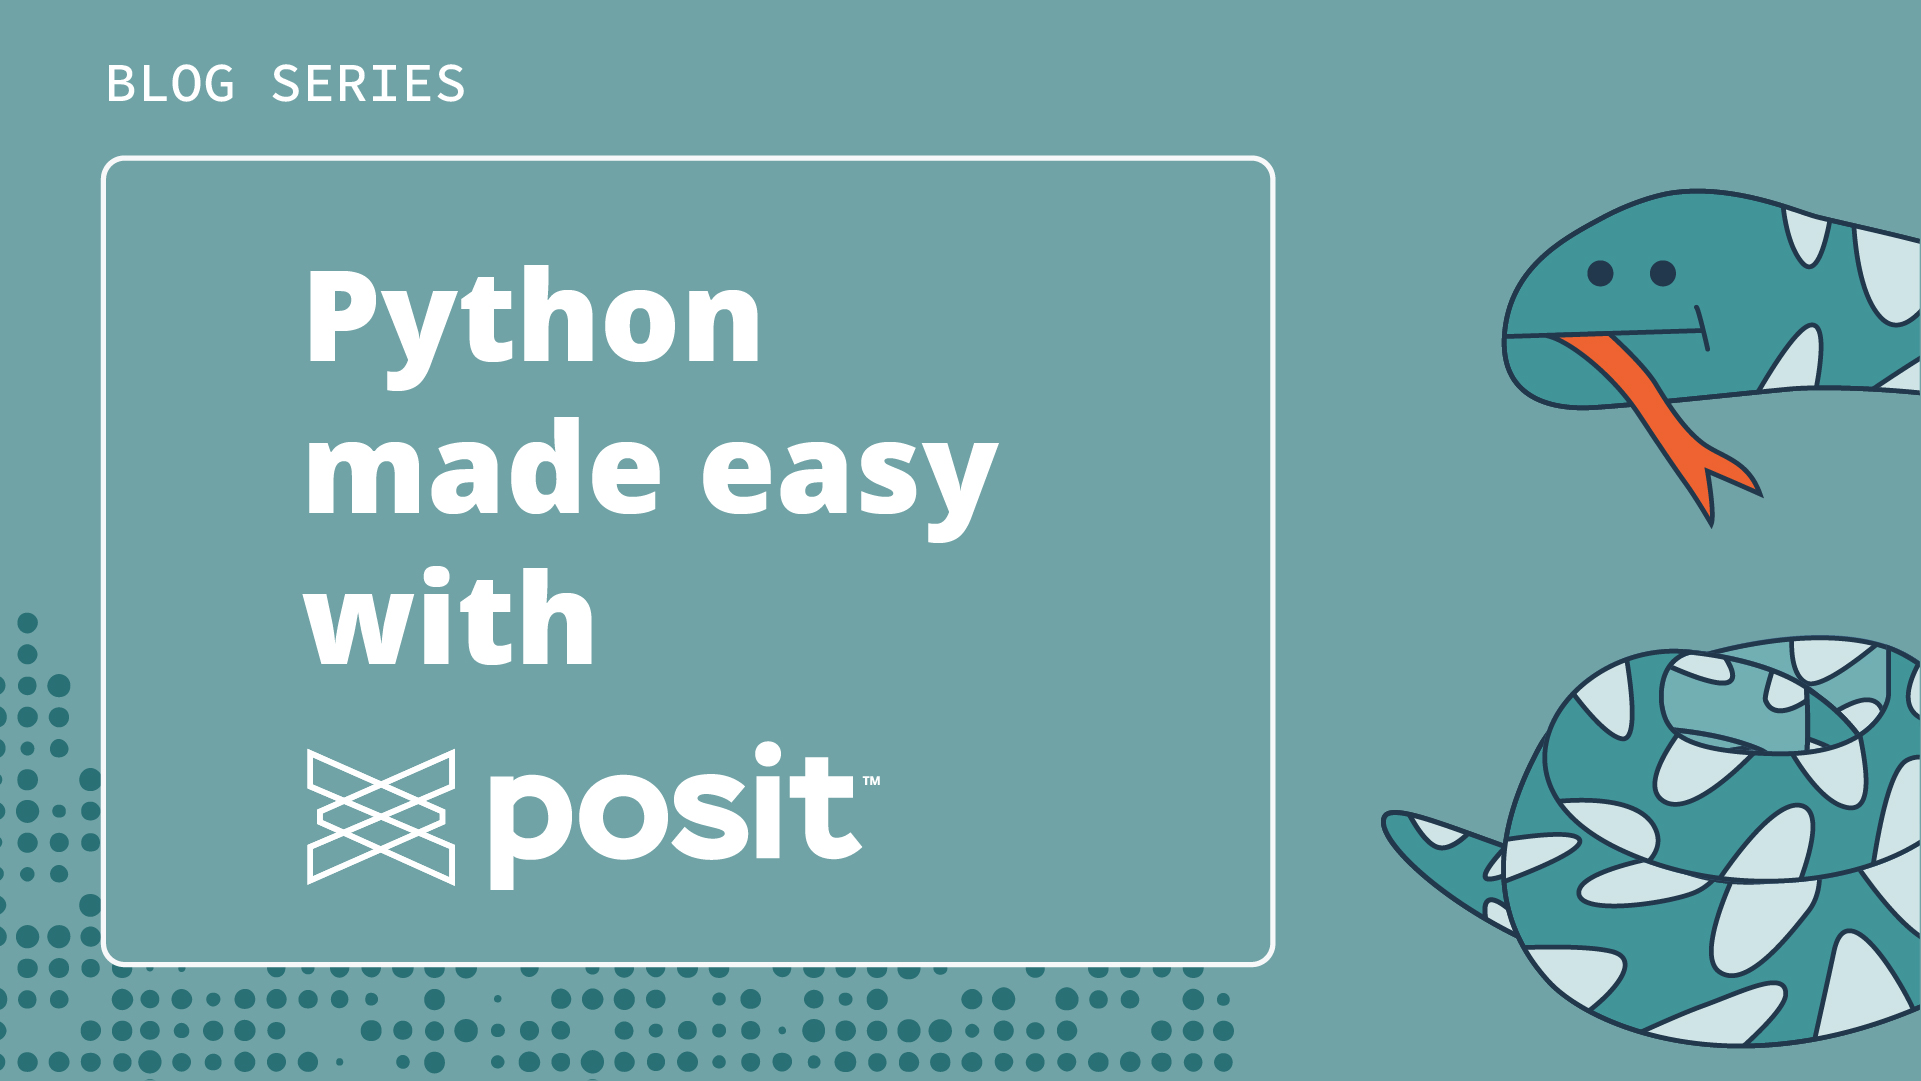 Text: Blog Series, Python made easy with Posit. A cartoon snake on the side.